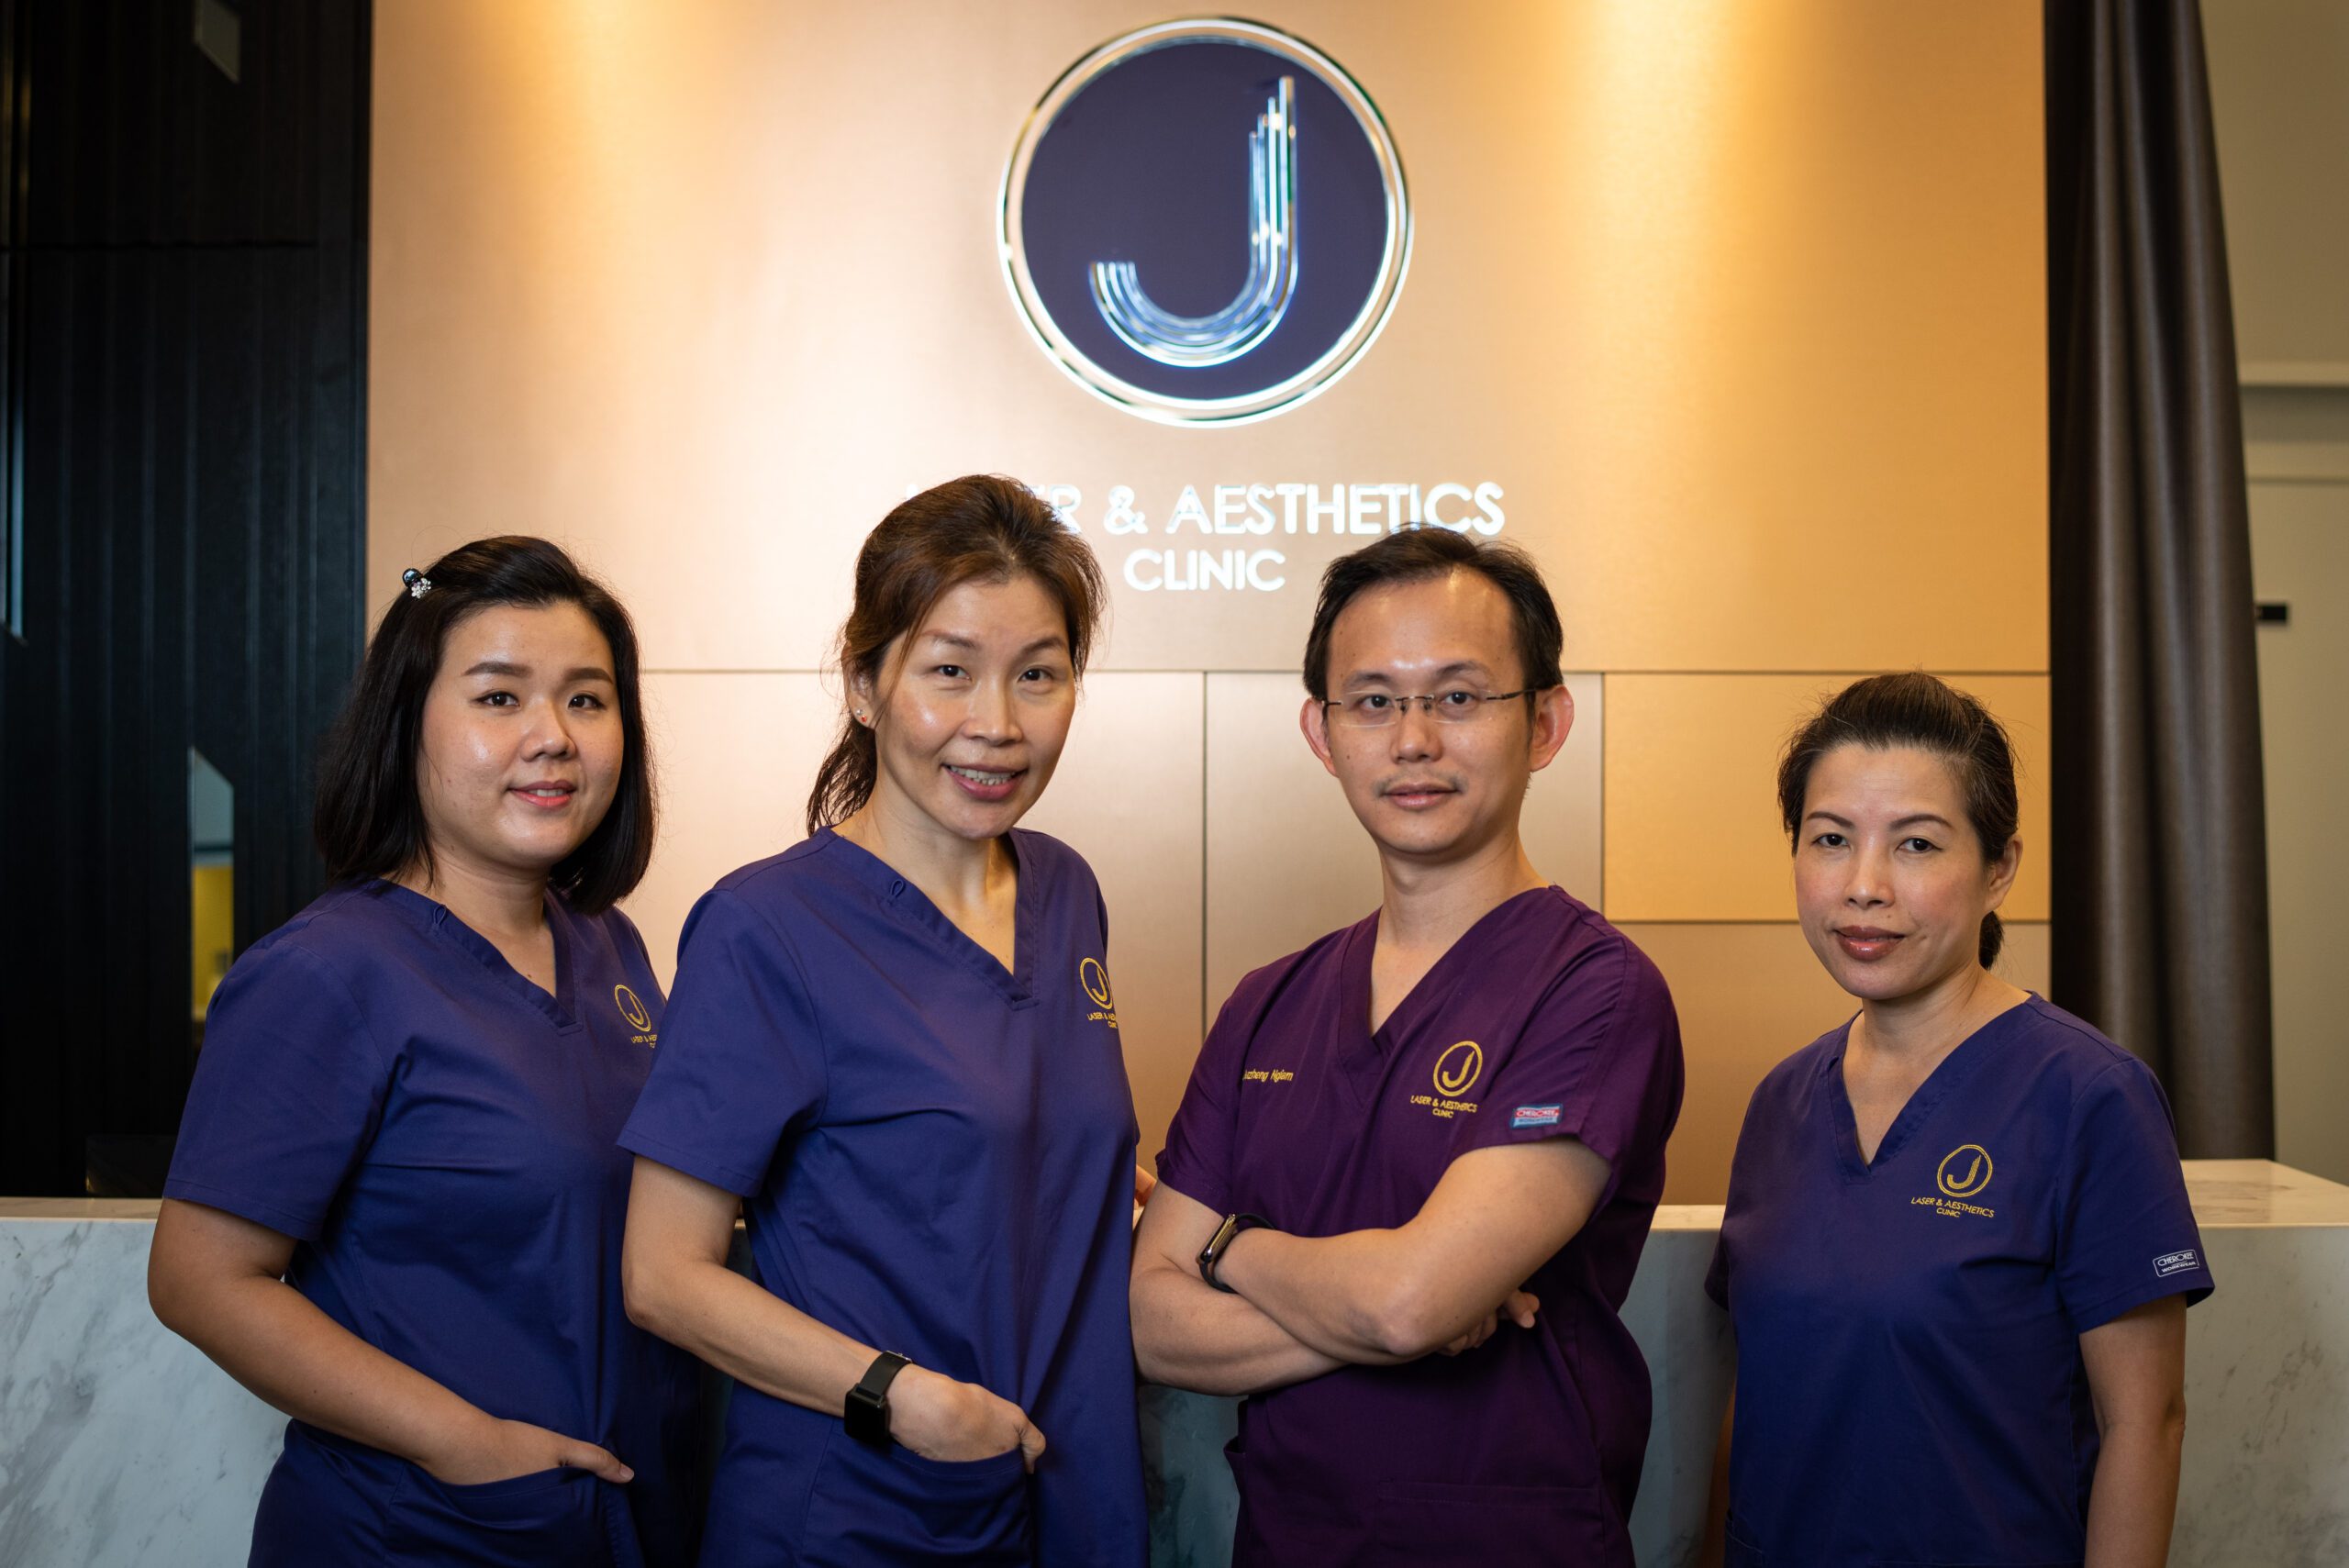 aesthetic doctor ngiam juzheng and team in clinic uniforms